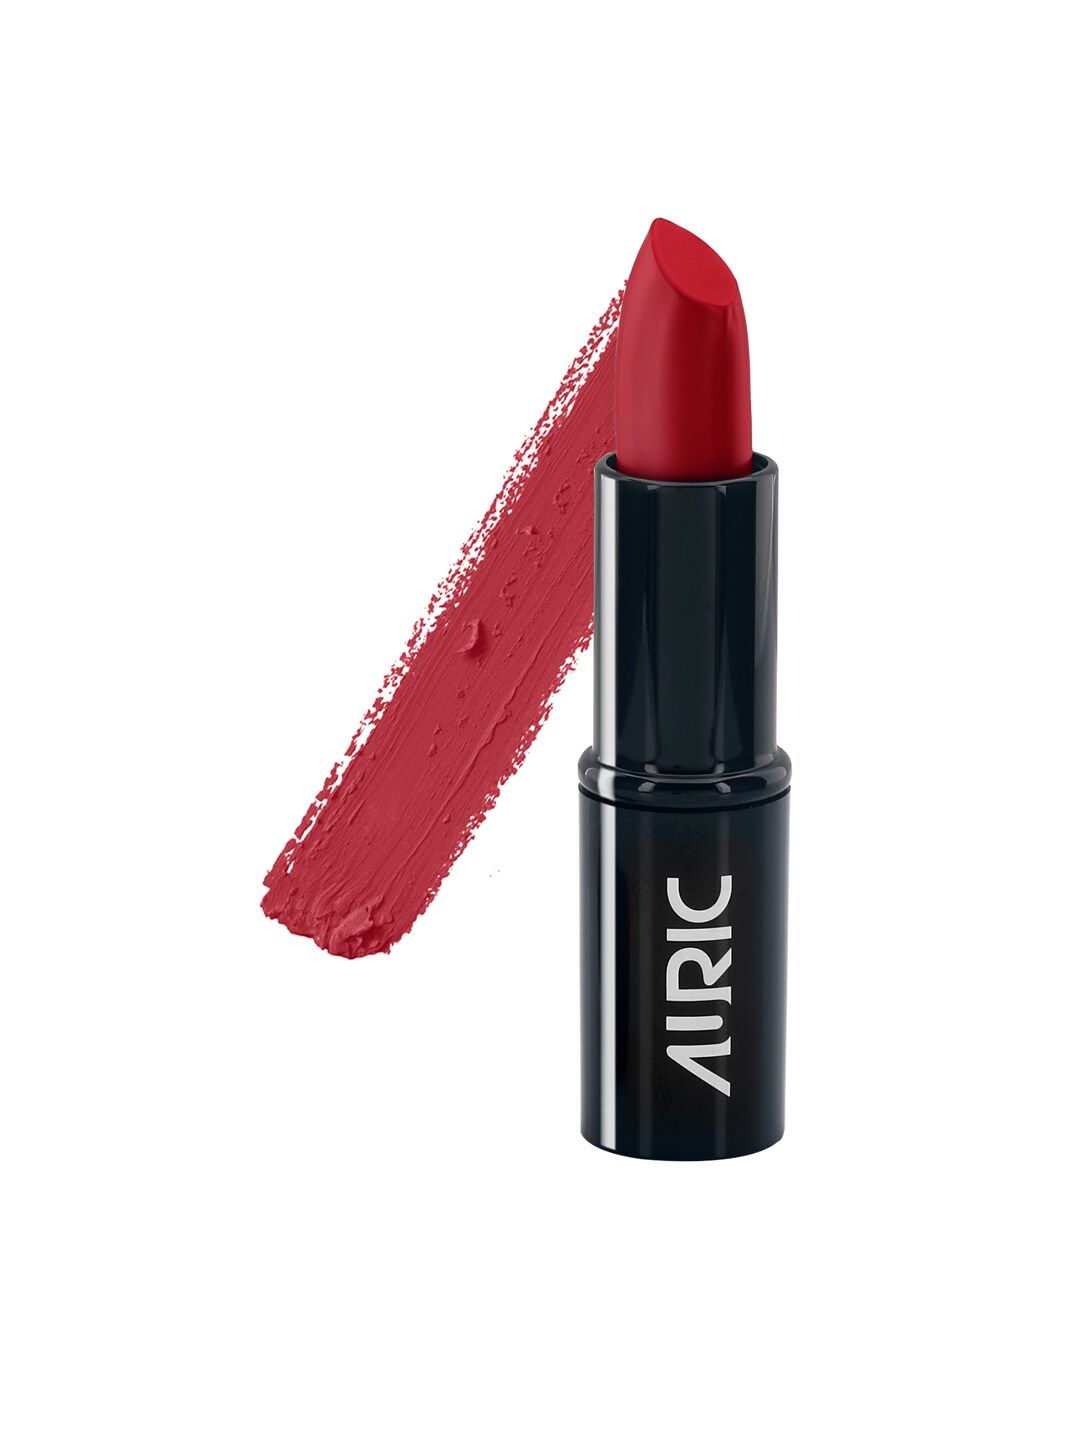 AURIC MatteCreme Lipstick Bloody Mary 3203 4 g Price in India